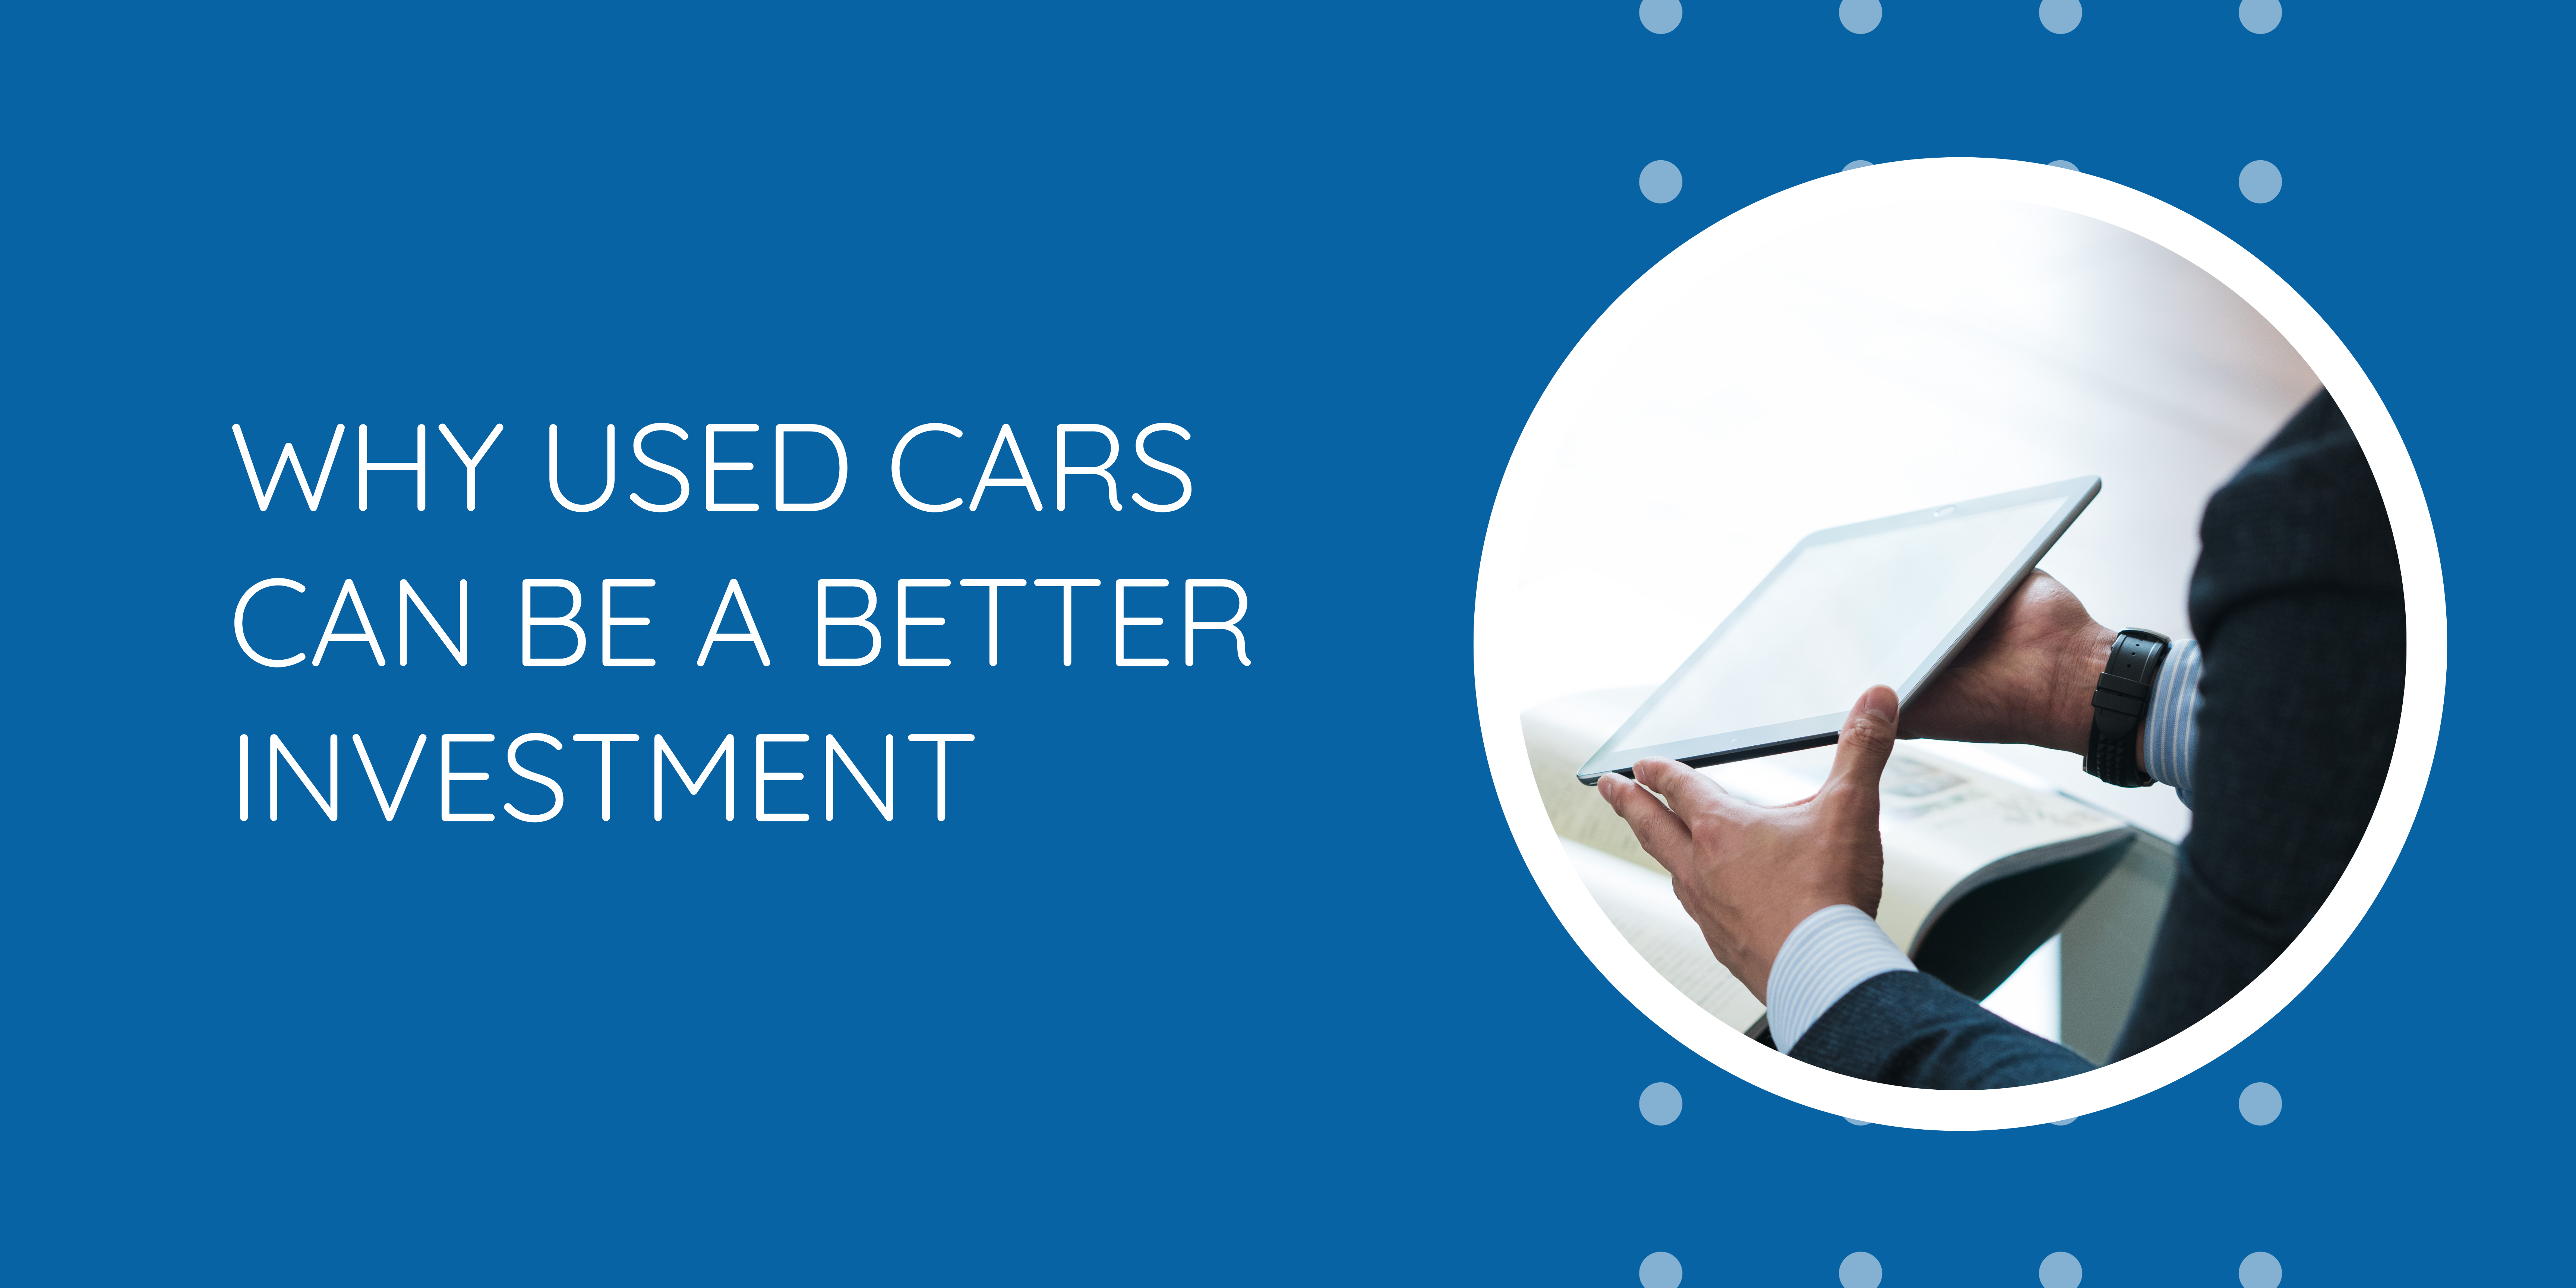 Why Used Cars Can Be a Better Investment